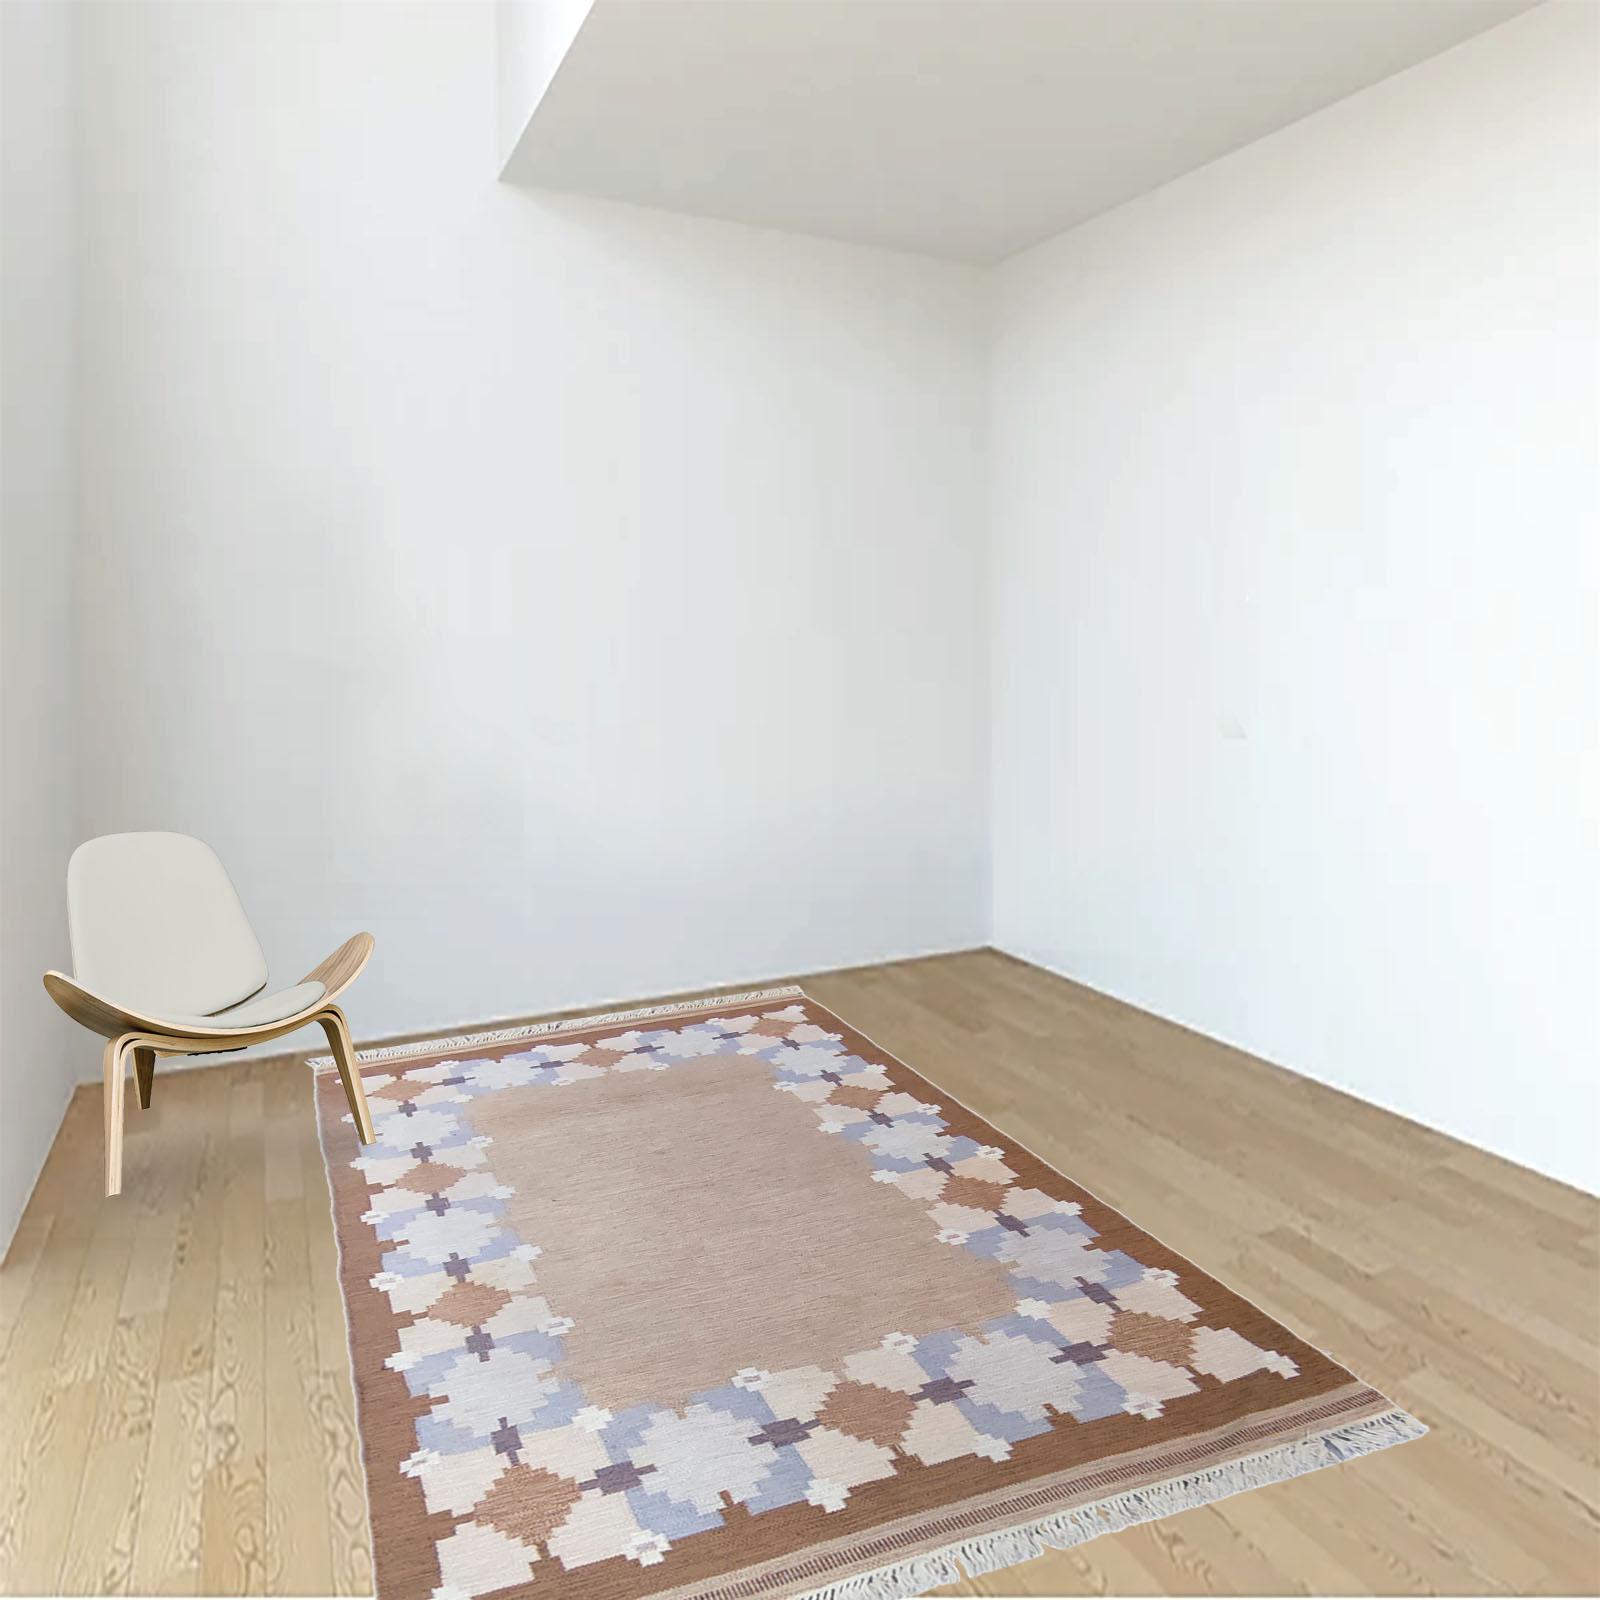 Vintage Swedish Rug Rollakan by Gitt Grannsjo, of large size 200x288 cm. 
Geometric design, this hand-woven wool Swedish Kilim rug beautifully embodies the simplicity of Scandinavian modern style. Open field center surrounded by a wide border of